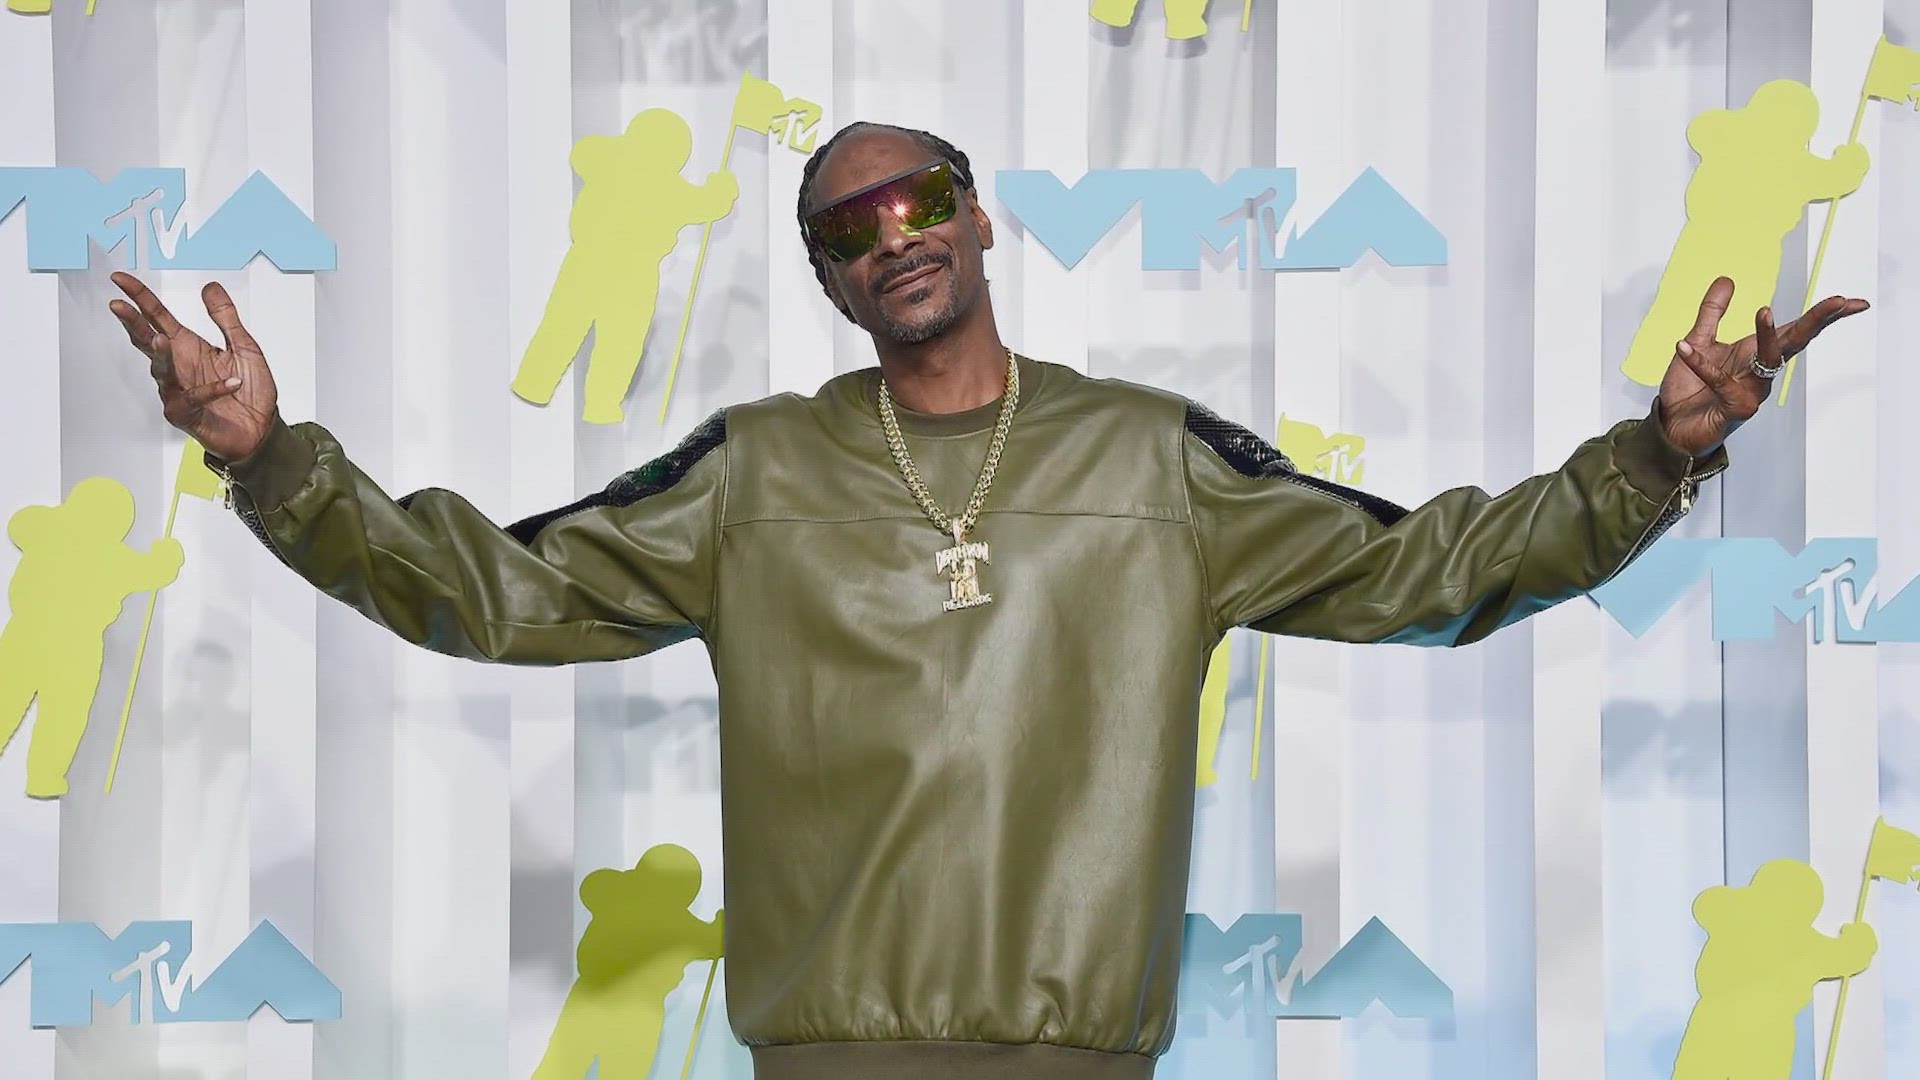 Legendary artist Snoop Dogg is bringing his tour with special guests Wiz Khalifa and Too $hort to Dos Equis Pavilion on Aug. 20.